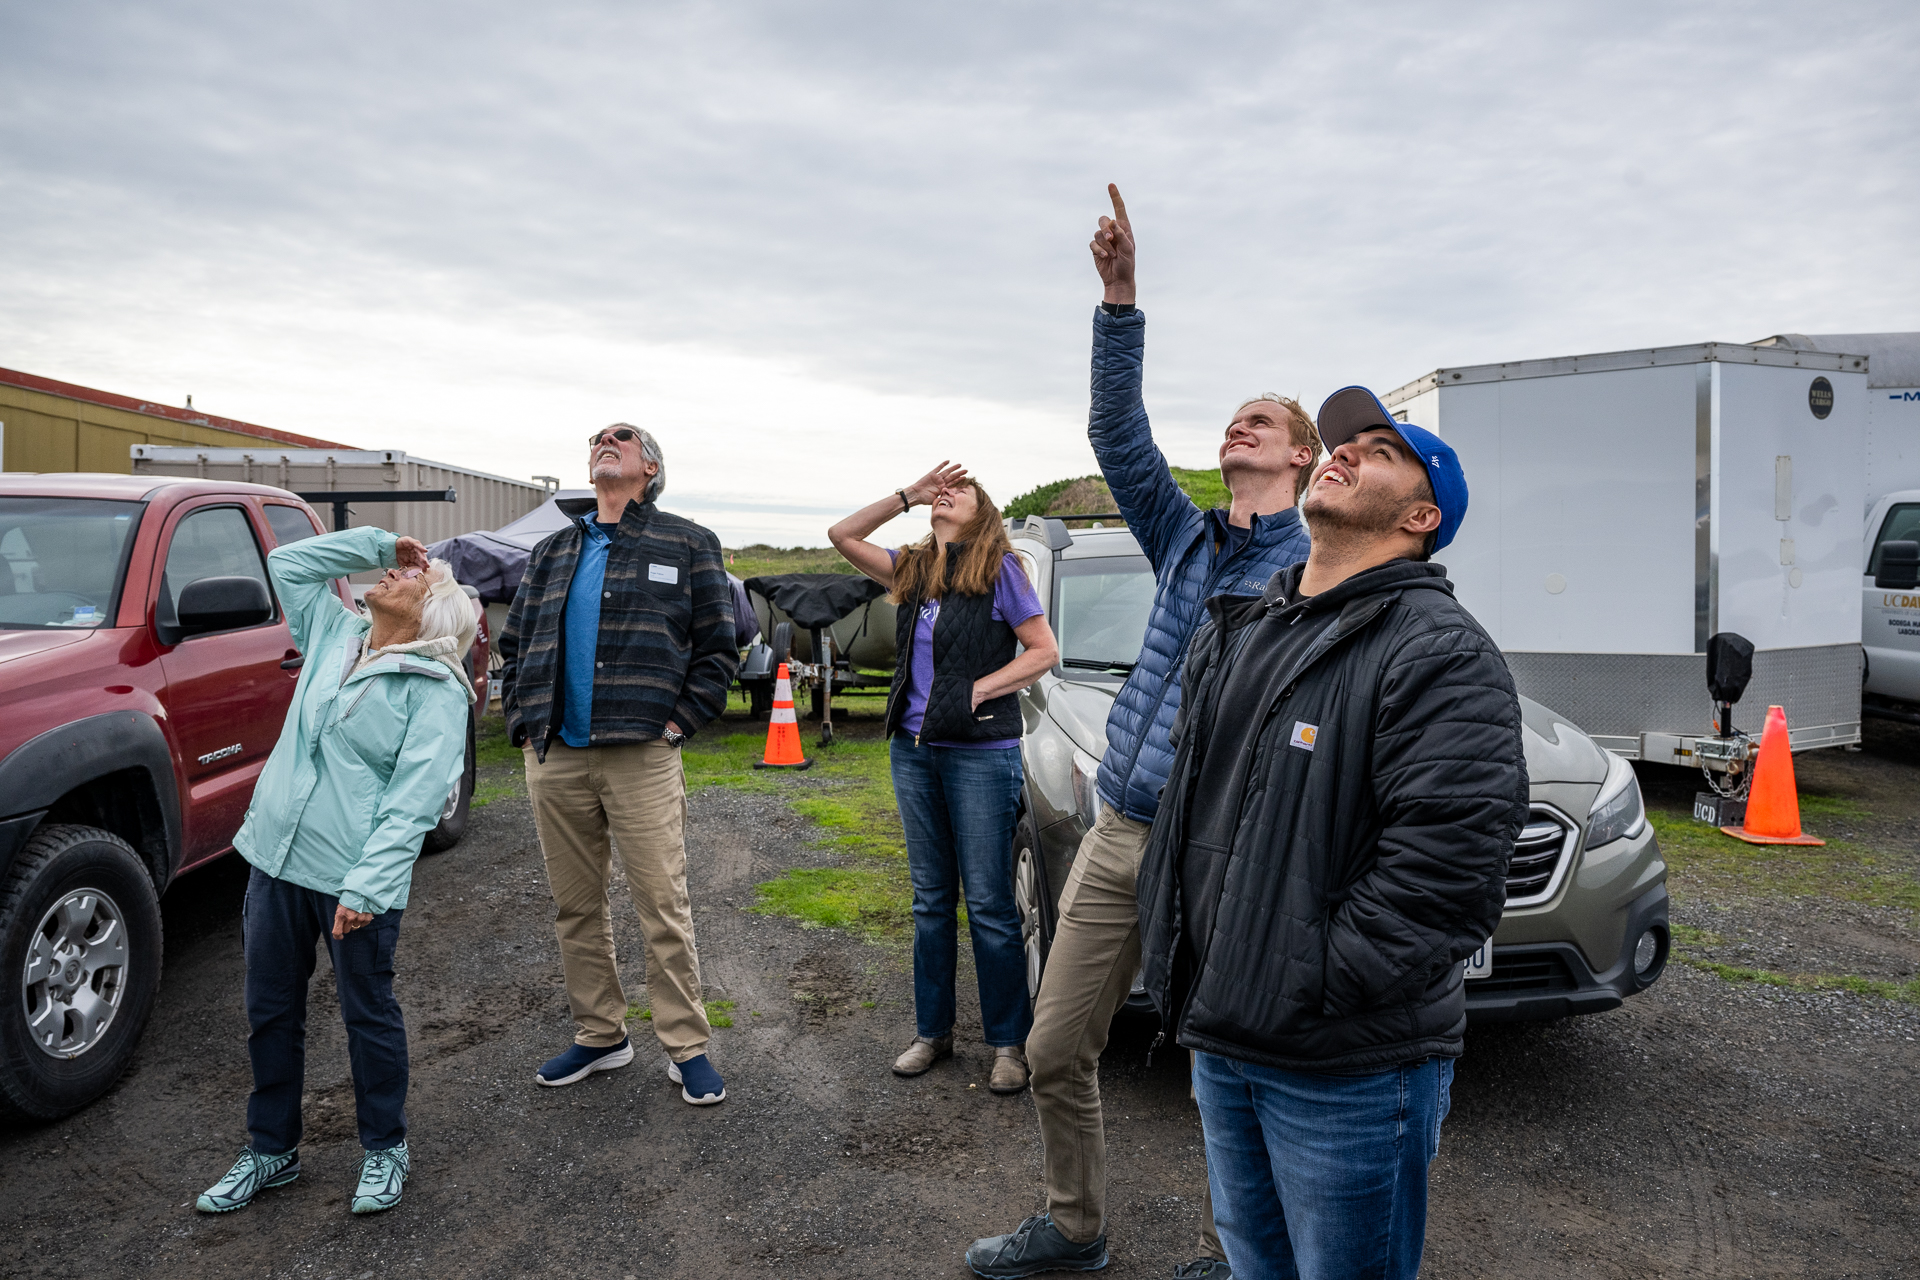 Five people look up toward an overcast sky with vehicles behind them.